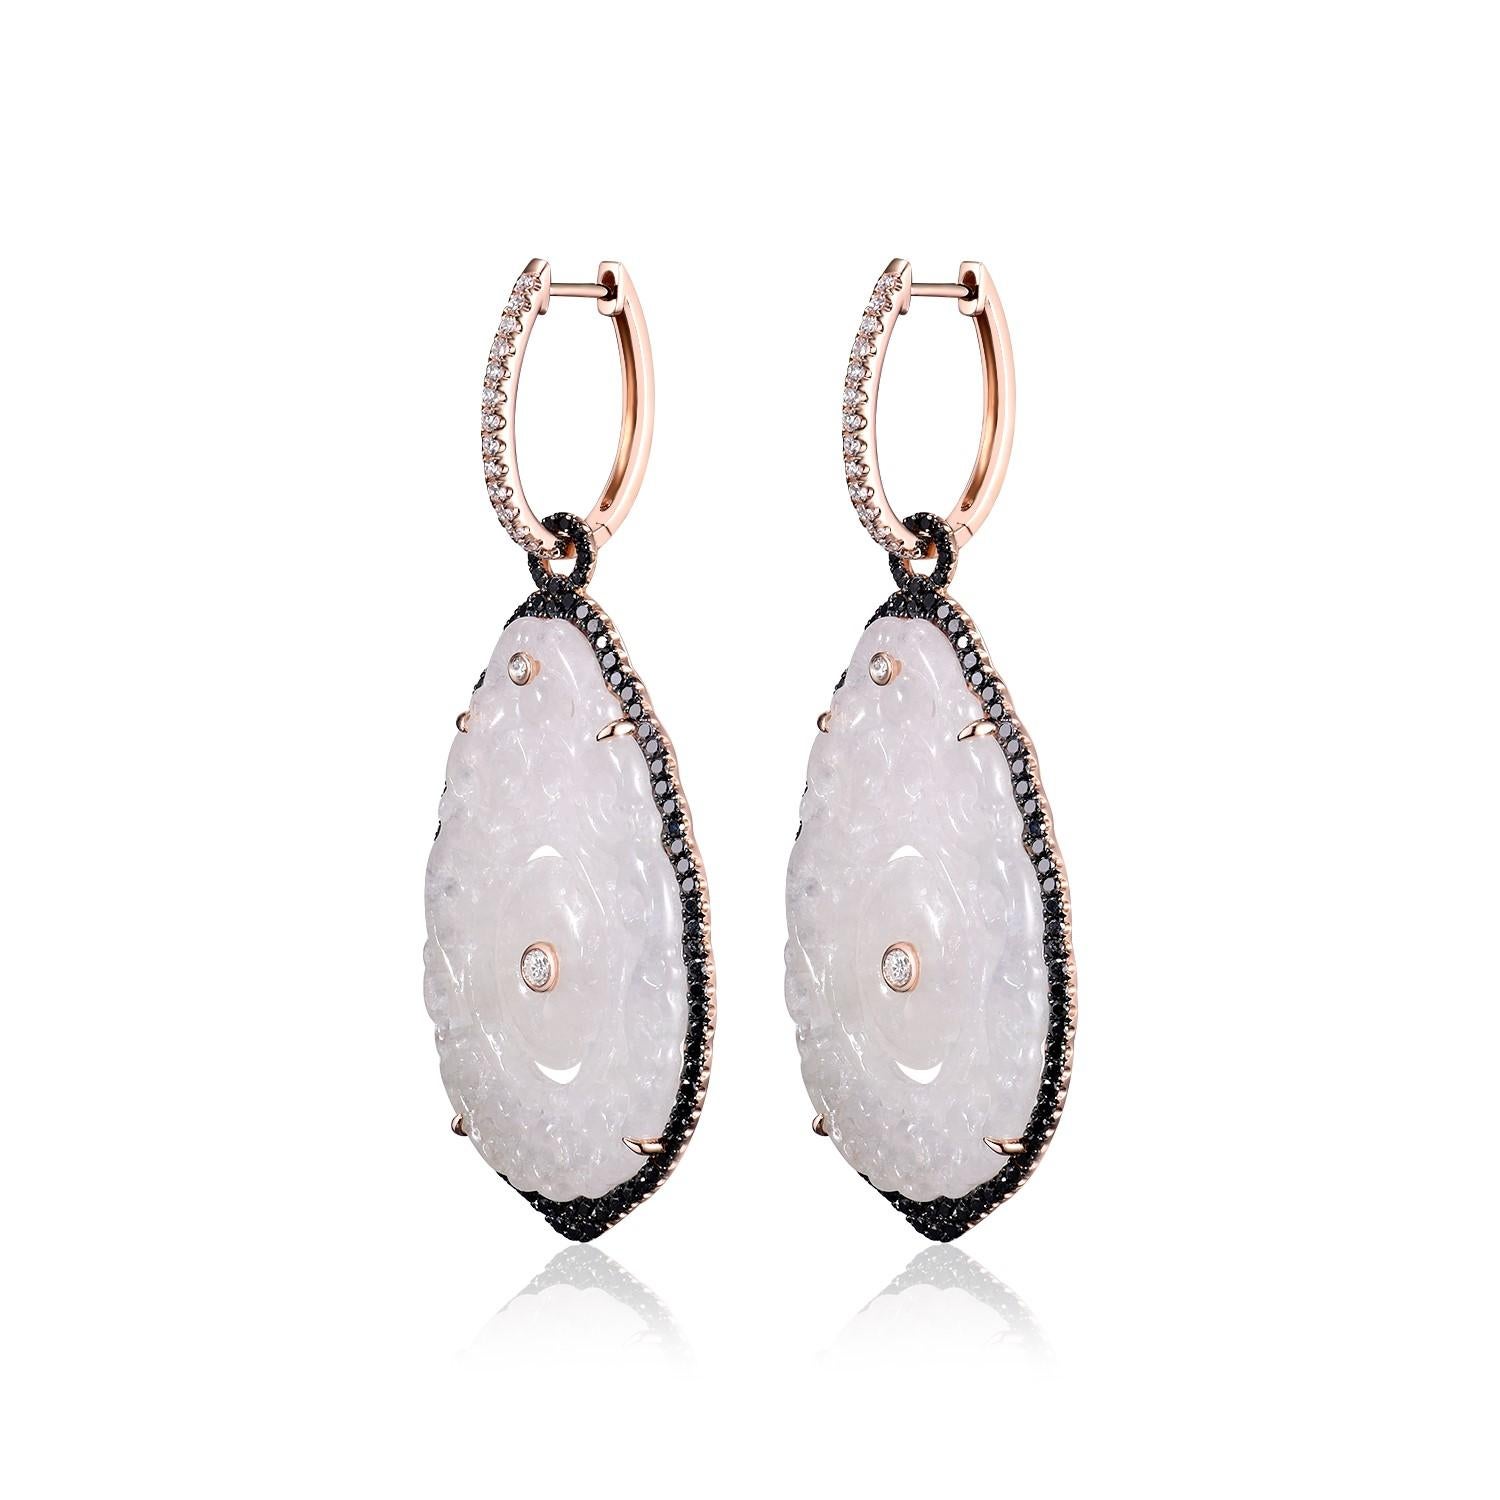 The Vintage White Jadeite Diamond Drop Earrings in 18K Rose Gold are a truly captivating pair of earrings that exude timeless beauty and elegance. Crafted in 18K rose gold, these earrings feature a combination of exquisite gemstones.

The hoop of